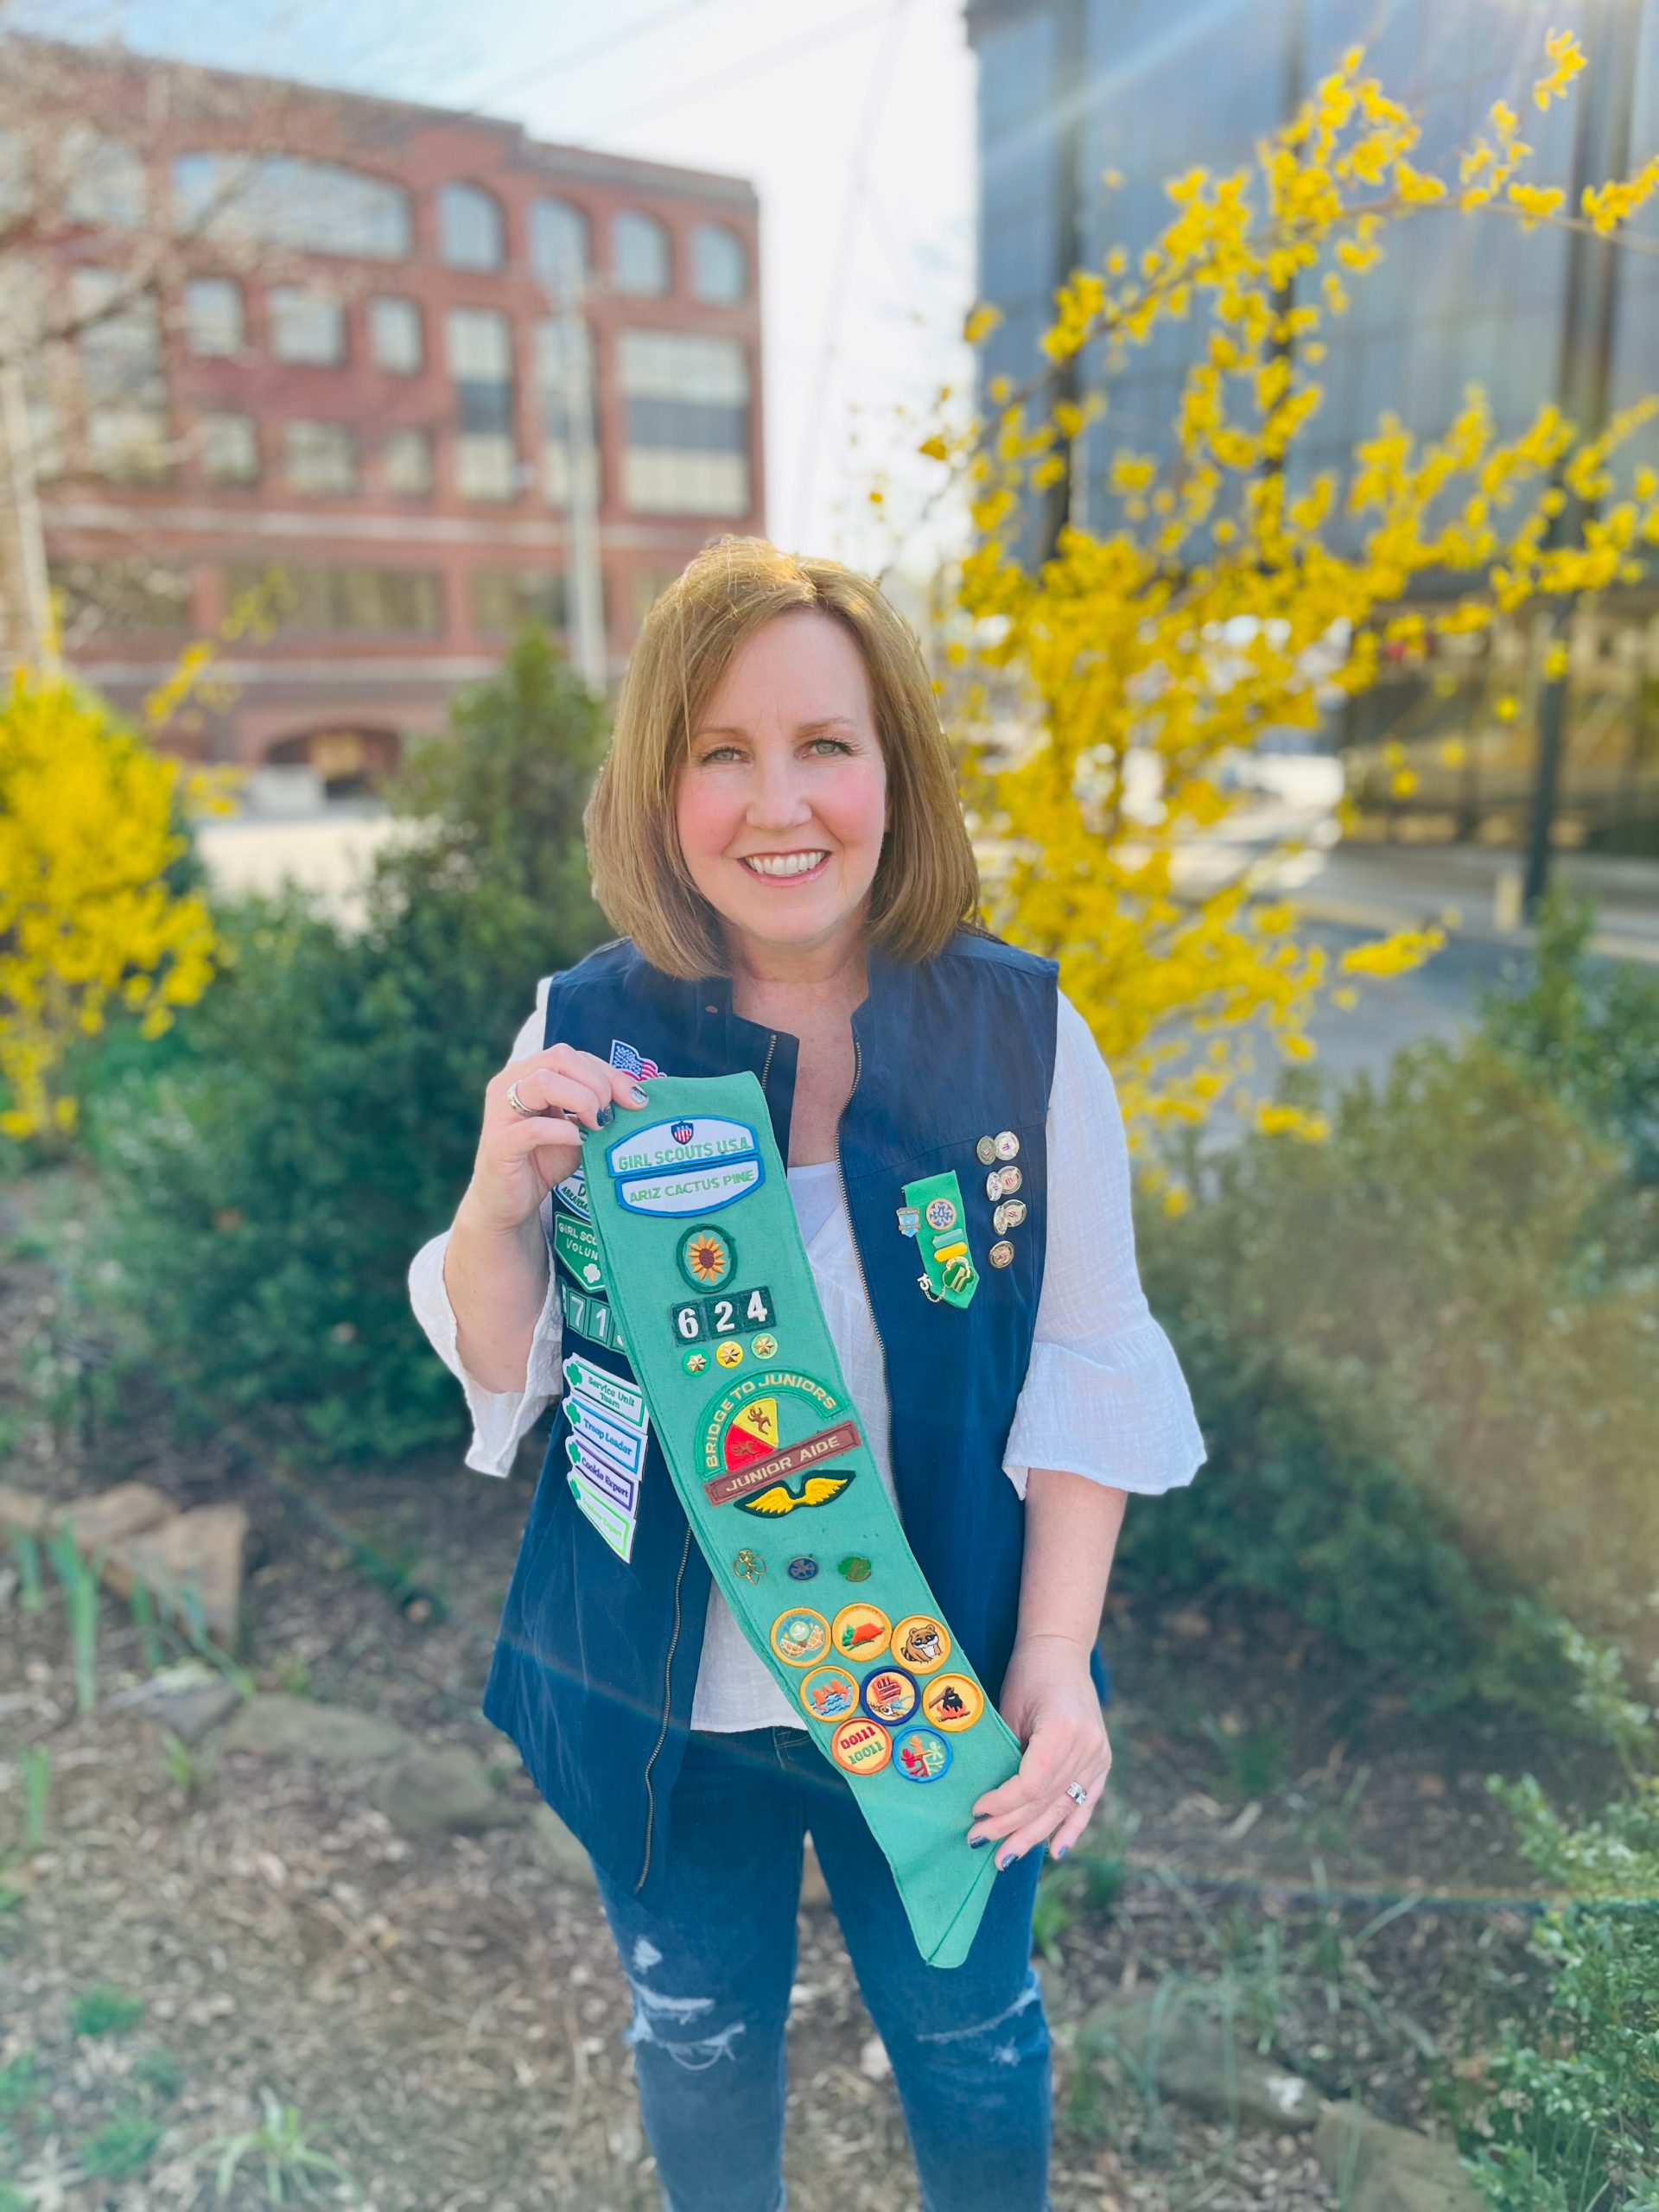 Adult Girl Scout and alumnae posing with Girl Scout sash full of Girl Scouting accomplishments